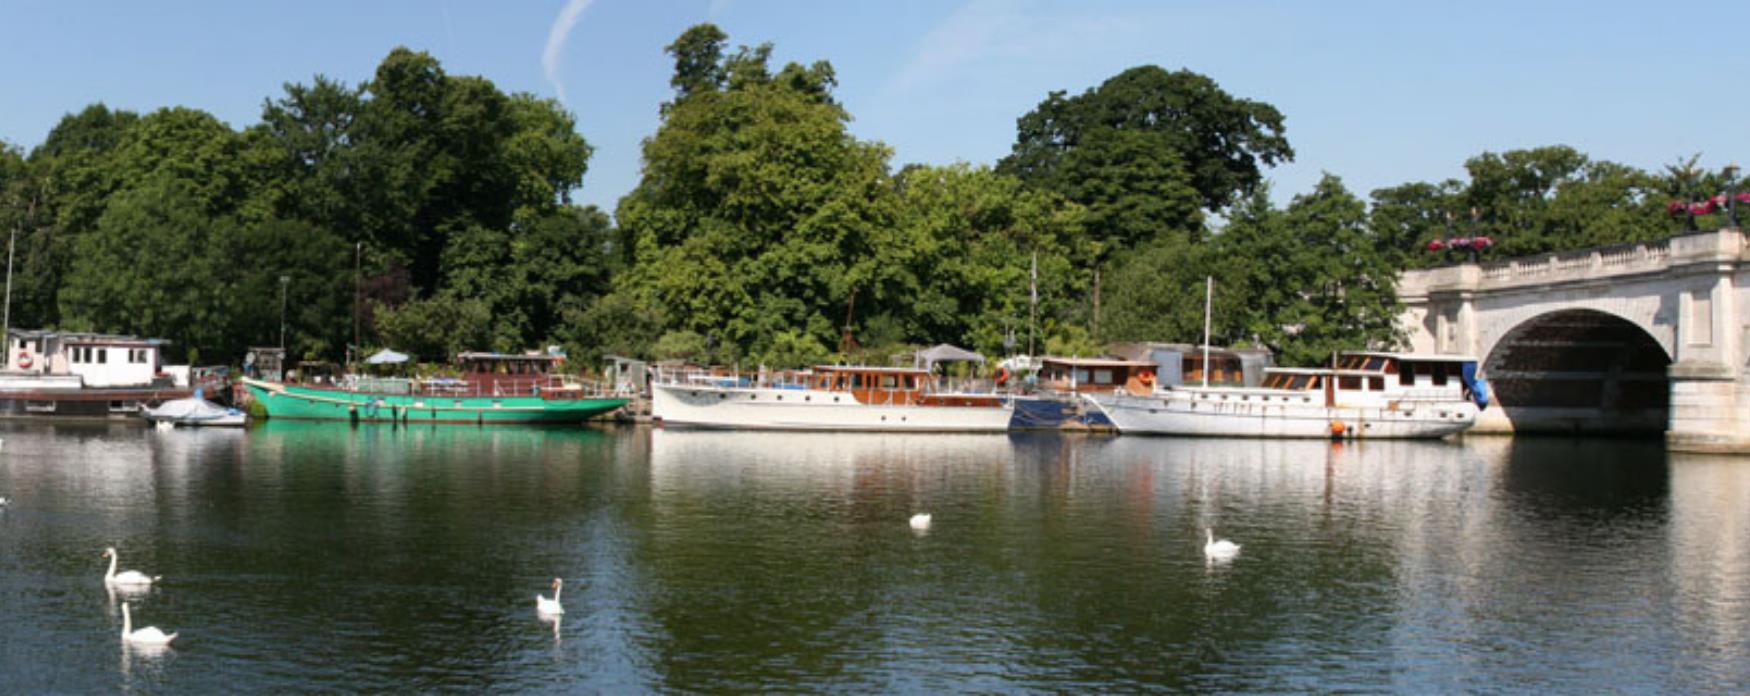 A picture of boats lined up in River Thames